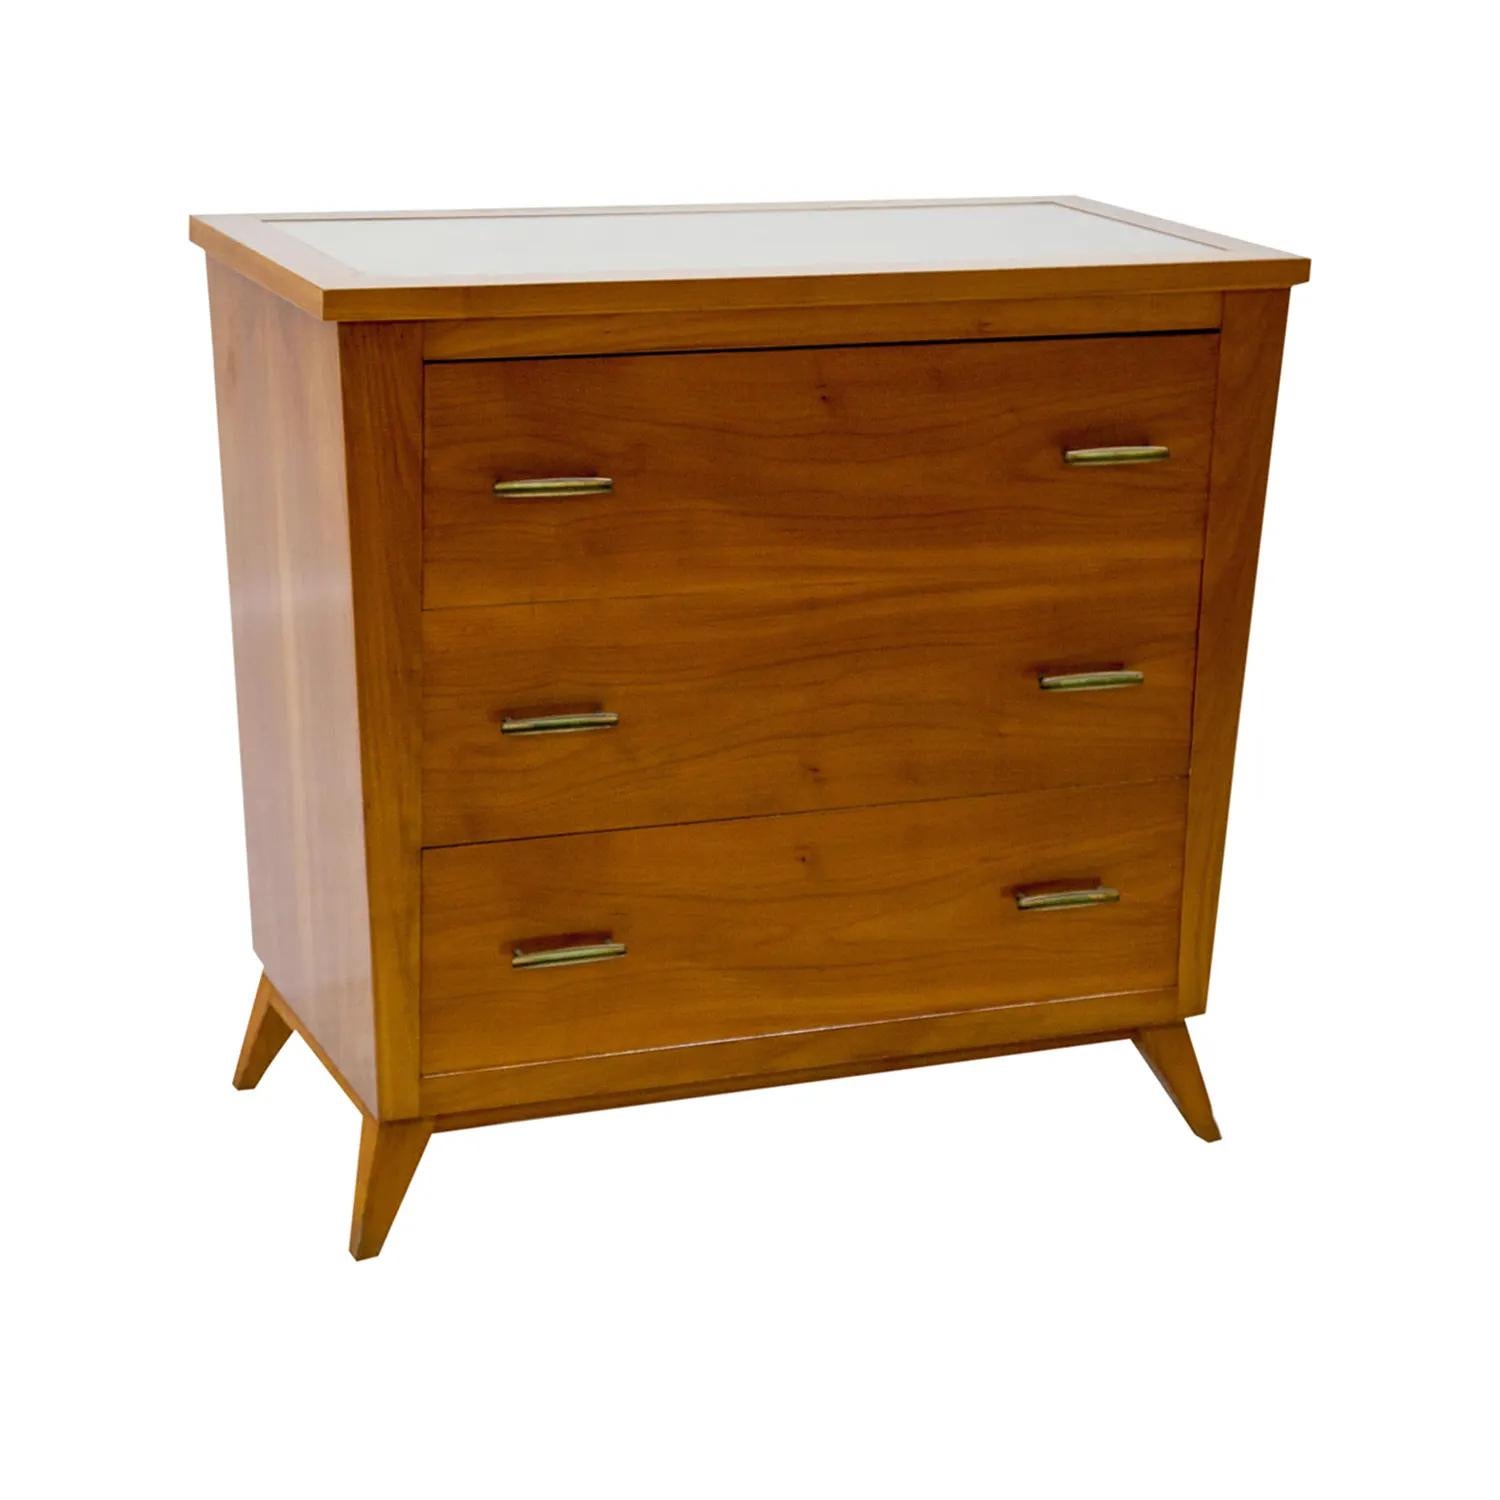 A light-brown, vintage Mid-Century Modern Italian chest with a trapezoidal body and an imbedded glass top, made of hand carved veneered Cherrywood in good condition. The small rectangular cabinet, cupboard is composed with three drawers, consisting